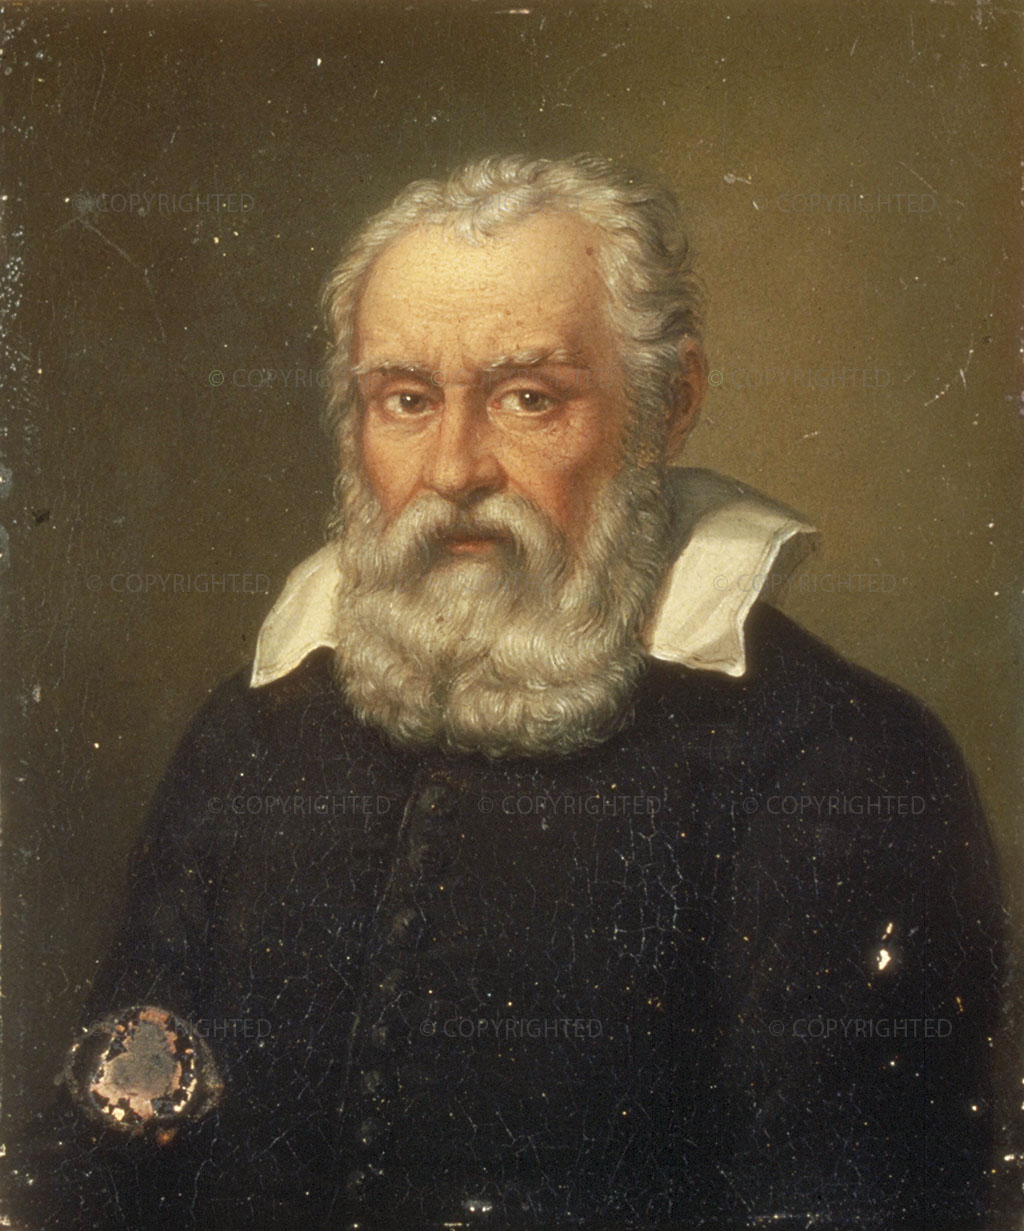 1624, Oil on silver plate, Private collection